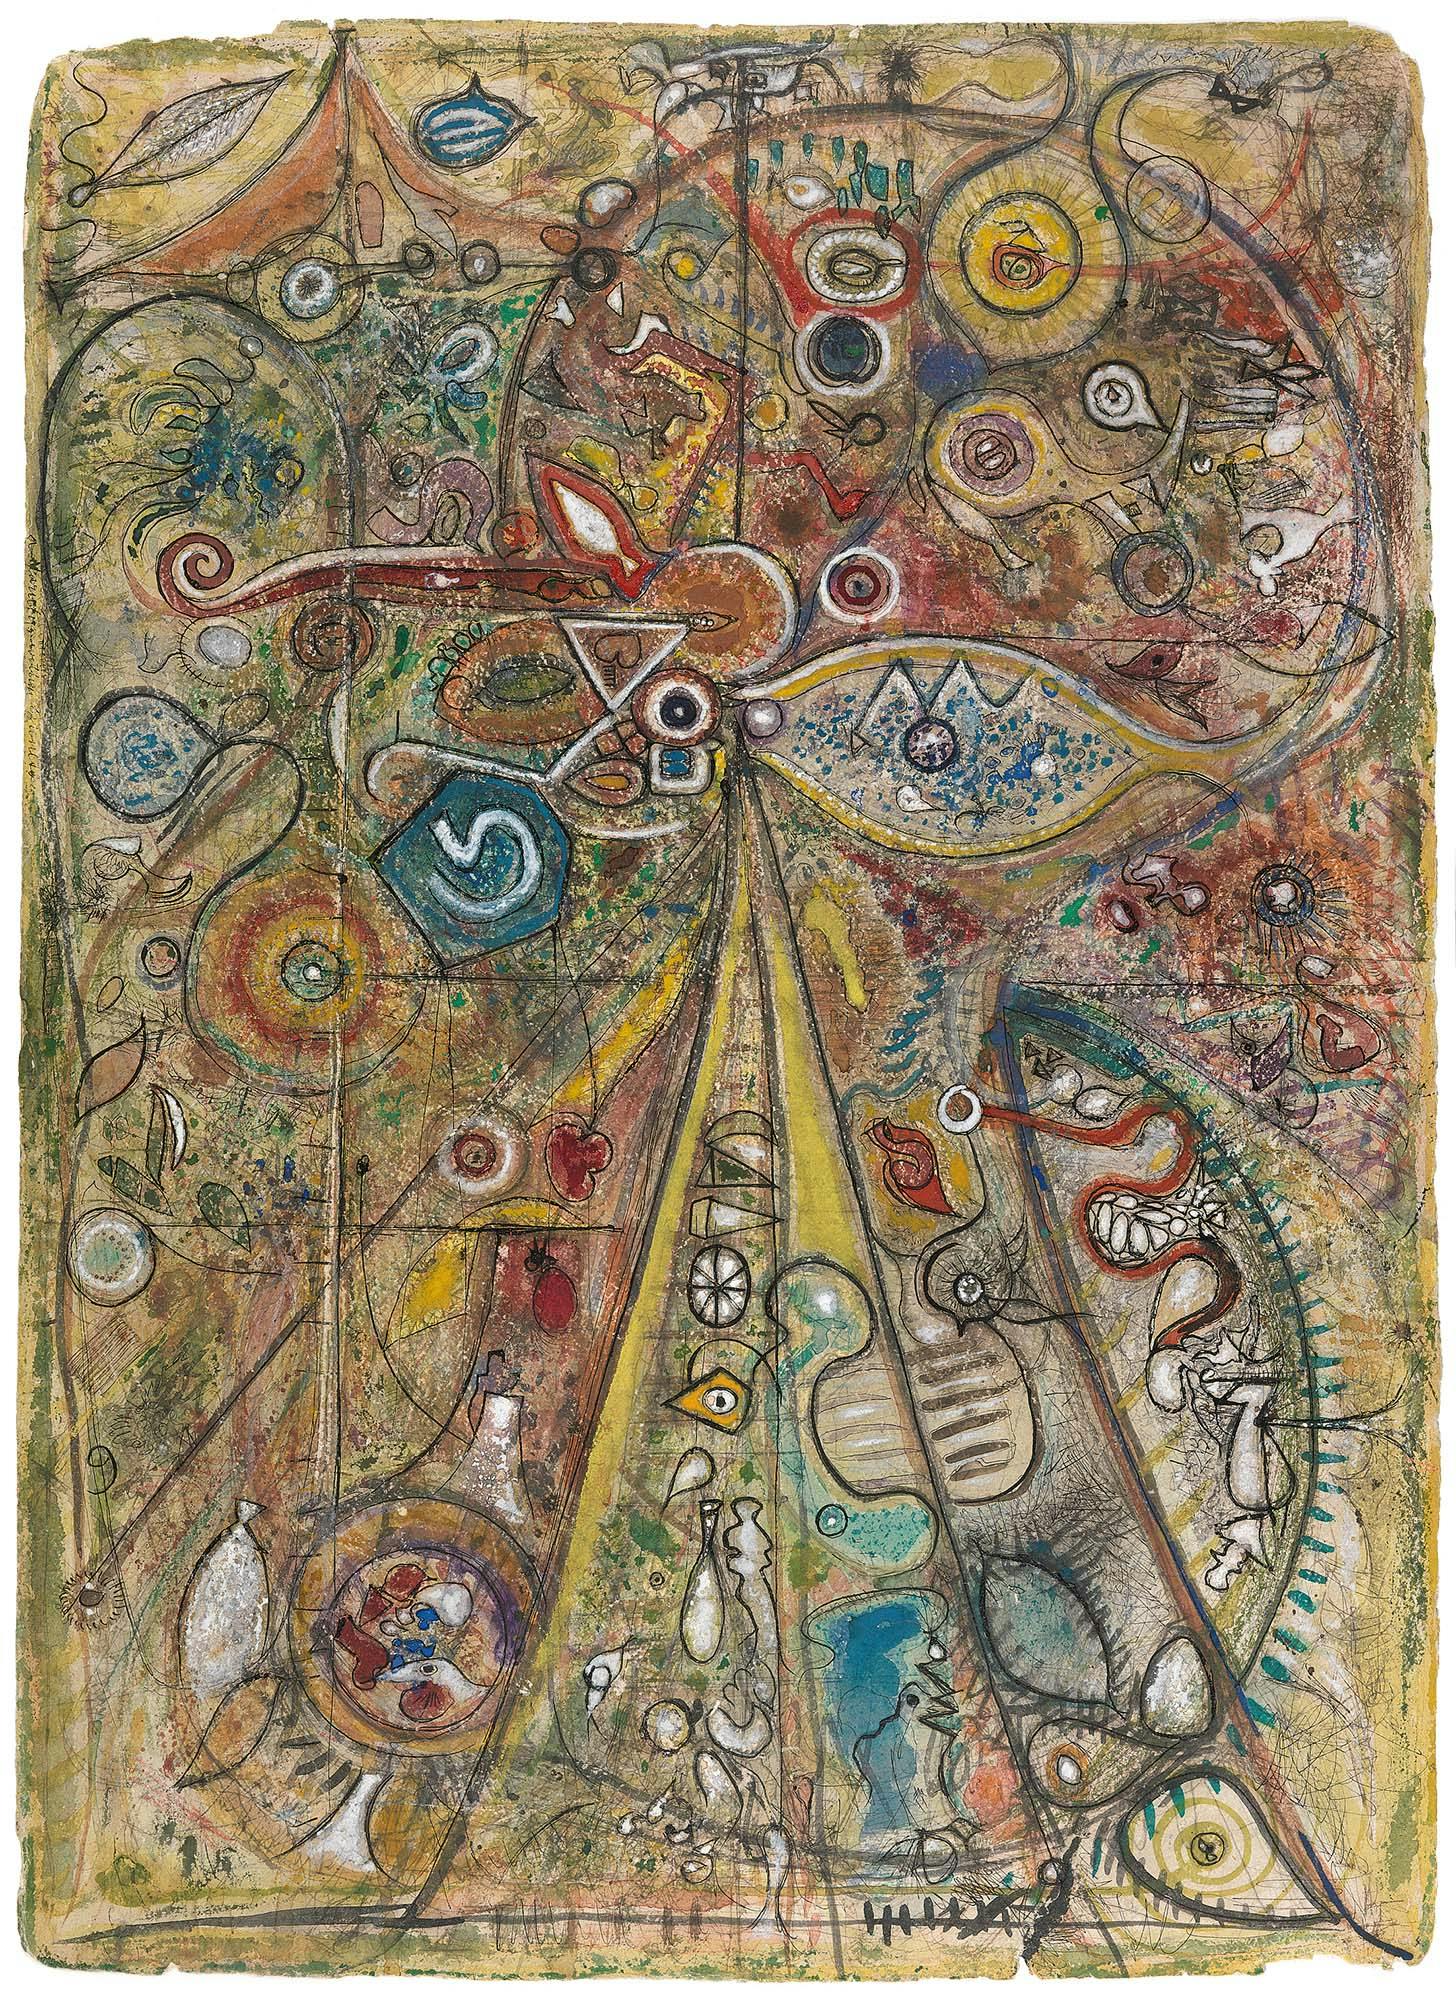 Sea World
1943–44
Watercolor gouache, graphite, and ink on handmade paper on handmade wove paper
31 3/4 x 23 in. (80.6 x 58.4 cm)
Fine Arts Museums of San Francisco: Legion of Honor, San Francisco, Ca., Achenbach Foundation for Graphic Arts, gift from the Estate of Richard Pousette-Dart (2005.121.1)
 – The Richard Pousette-Dart Foundation